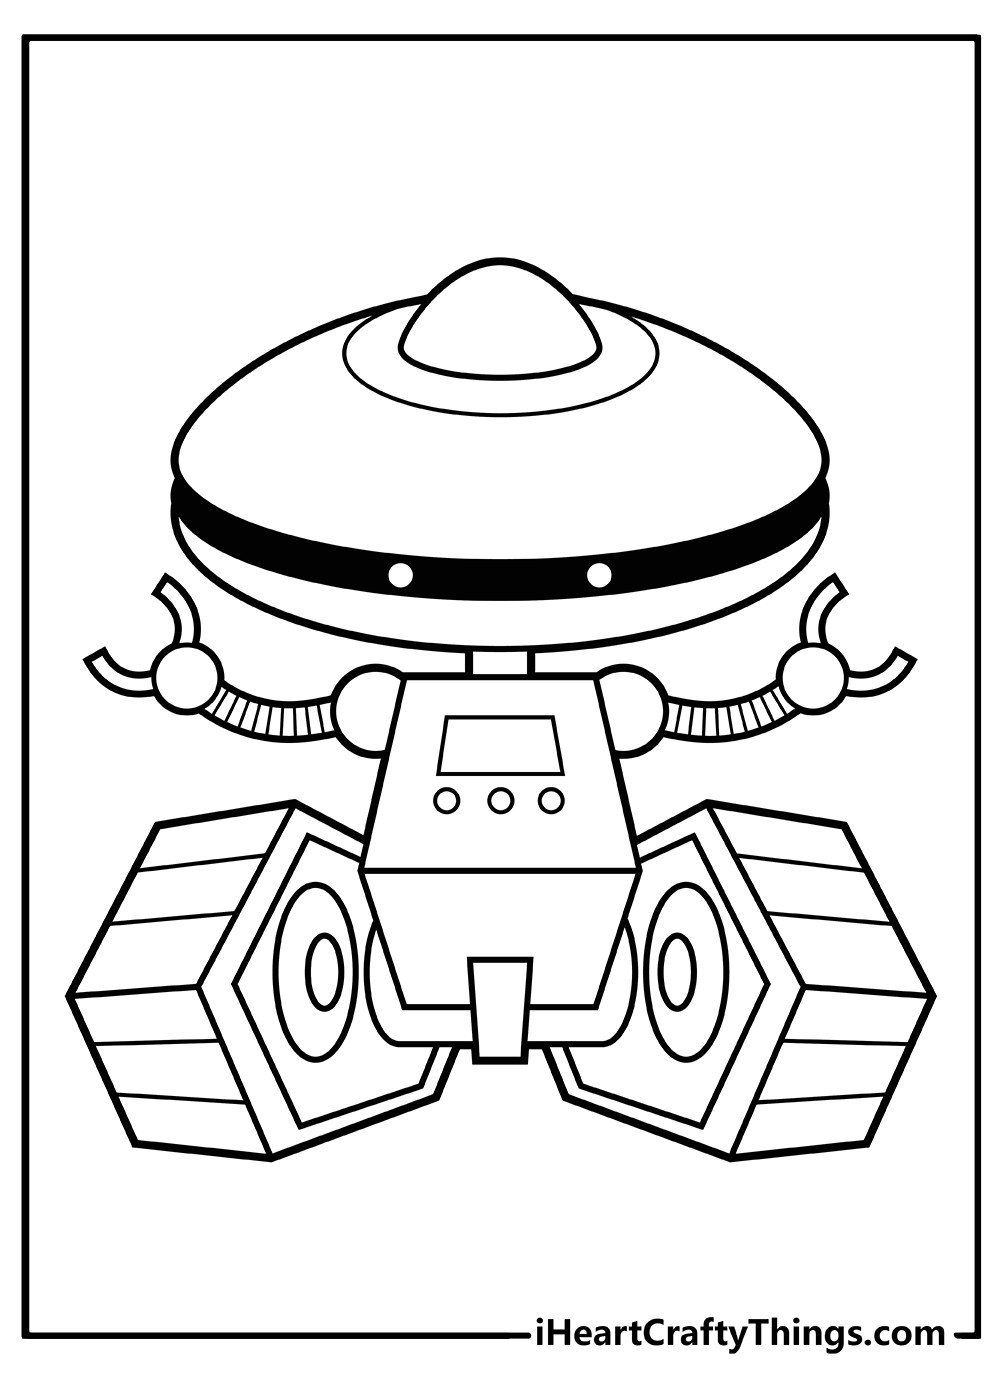 Robot Coloring Pages for kids free printable